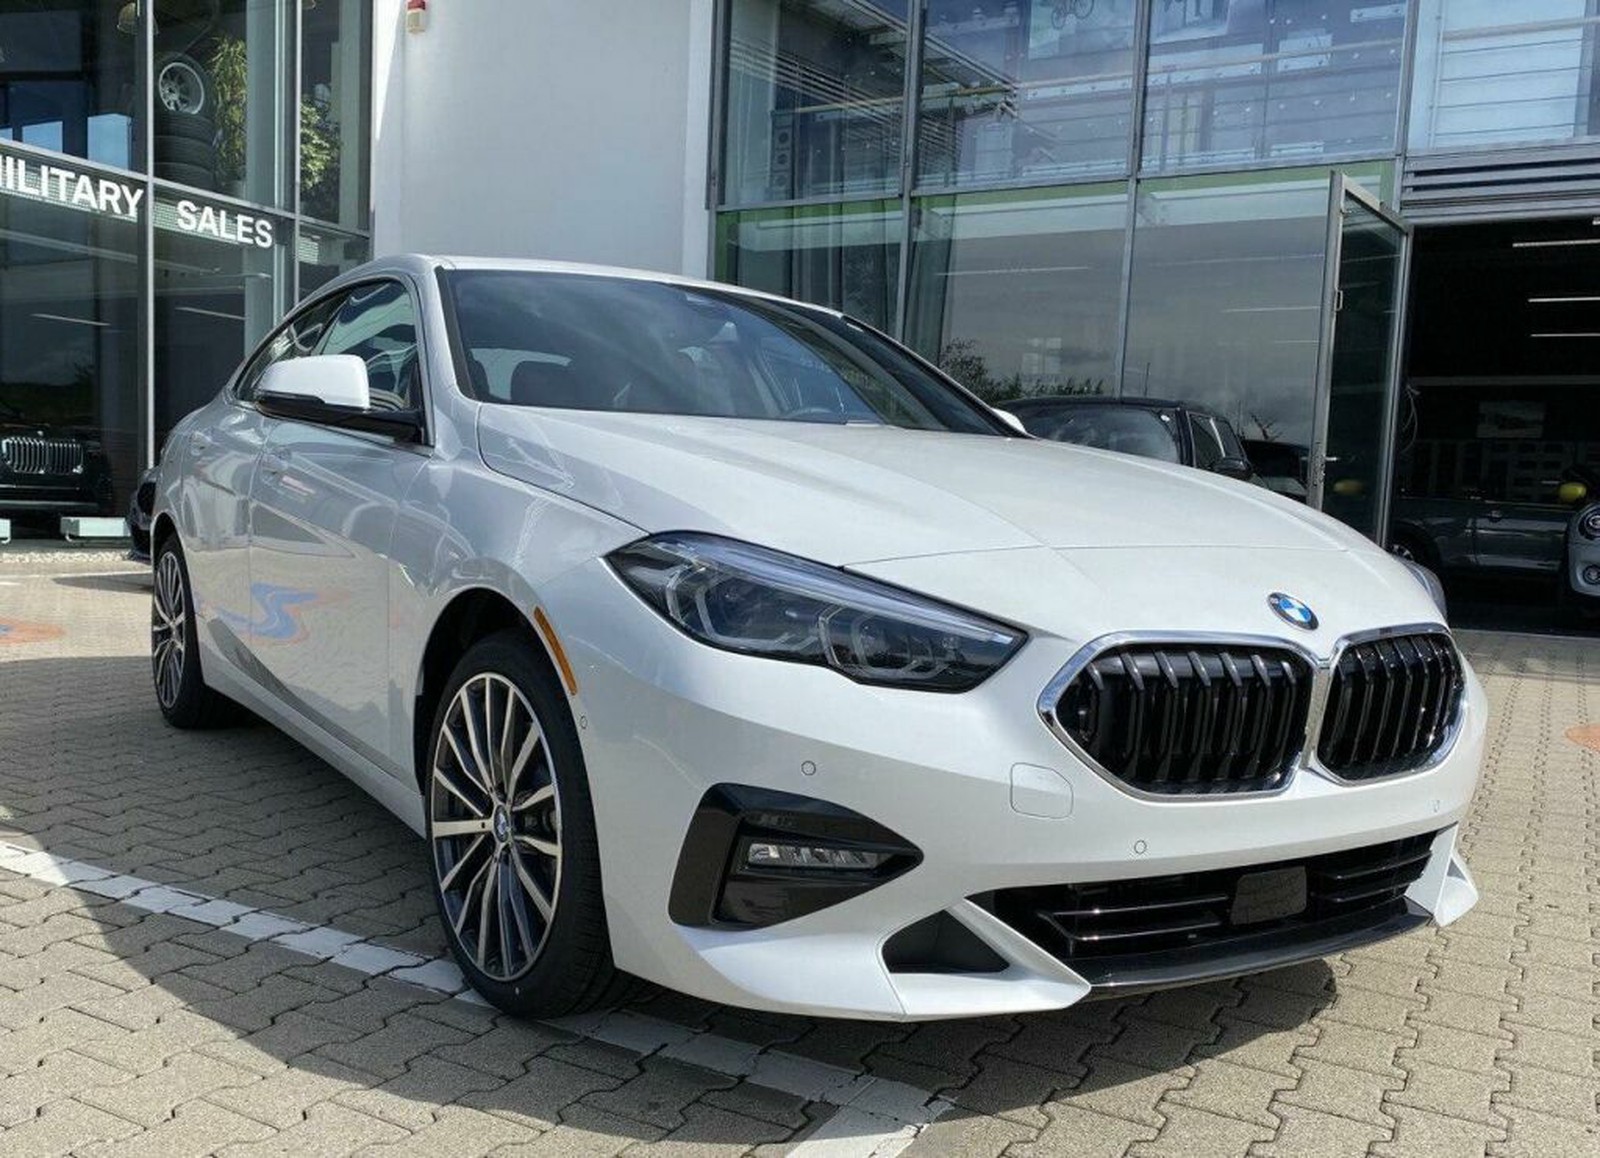 BMW 228 i xDrive Gran Coupe Sport Line - Tax Free Military Sales in